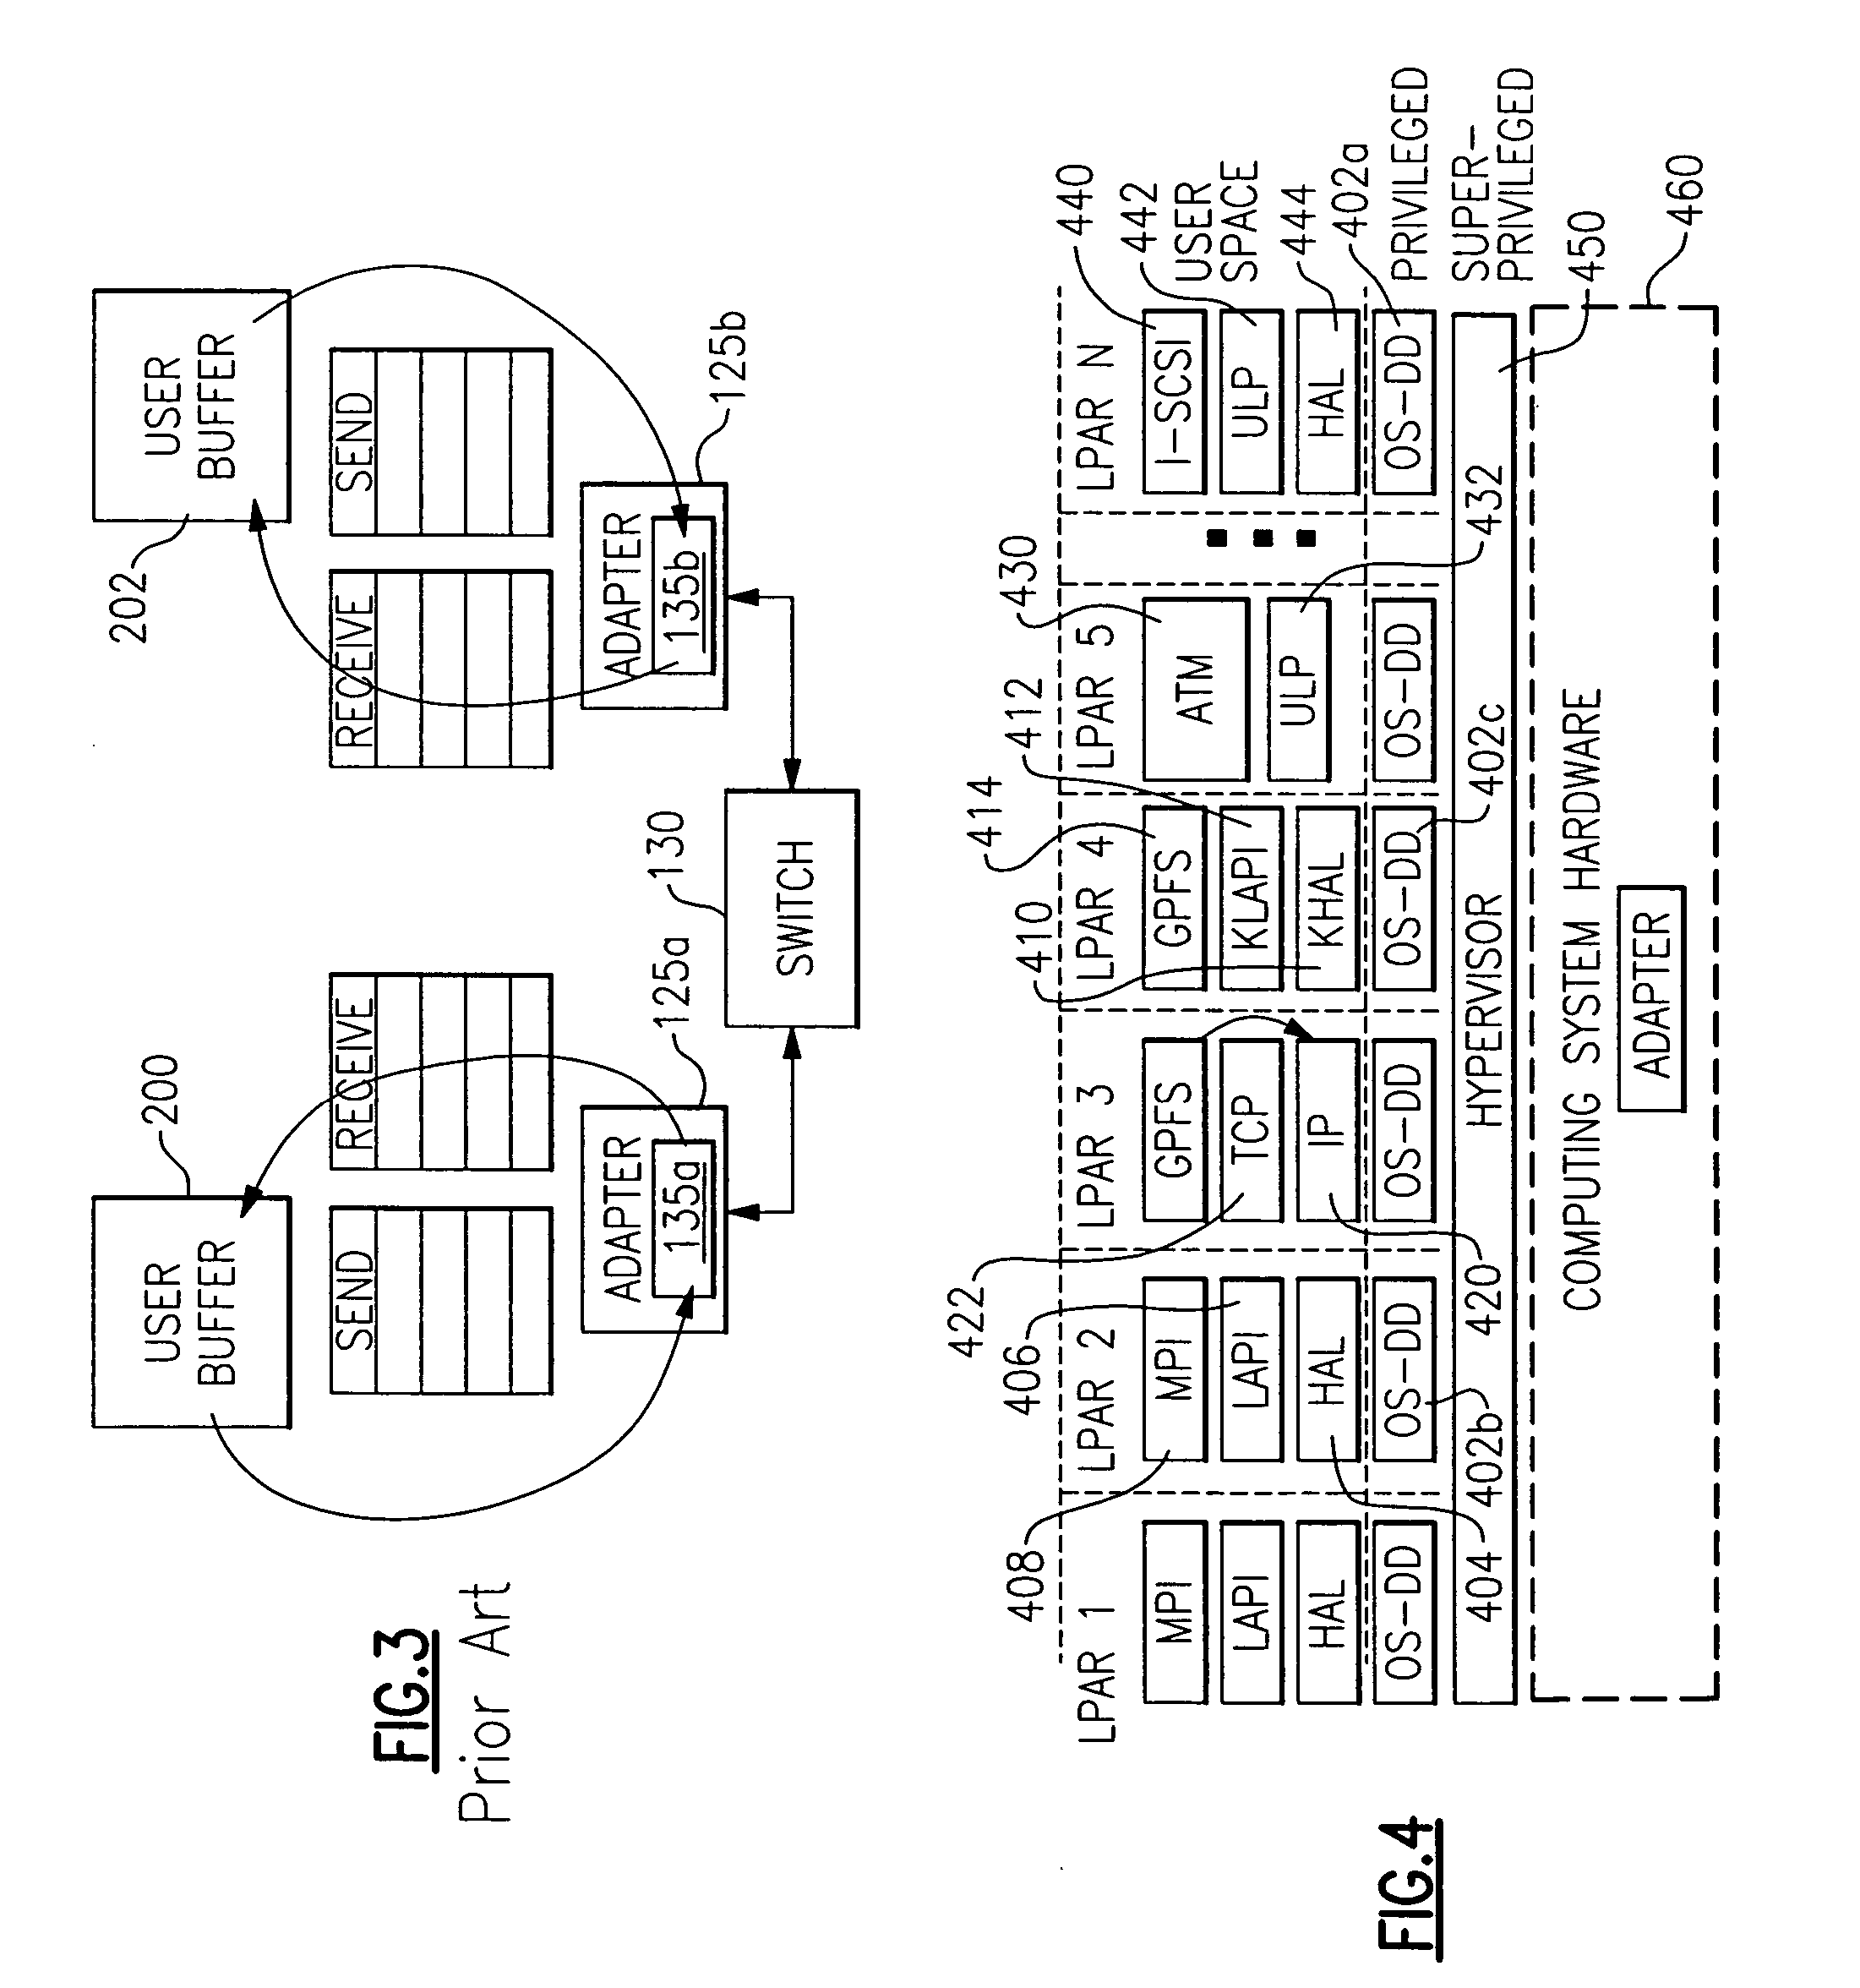 Communication resource reservation system for improved messaging performance